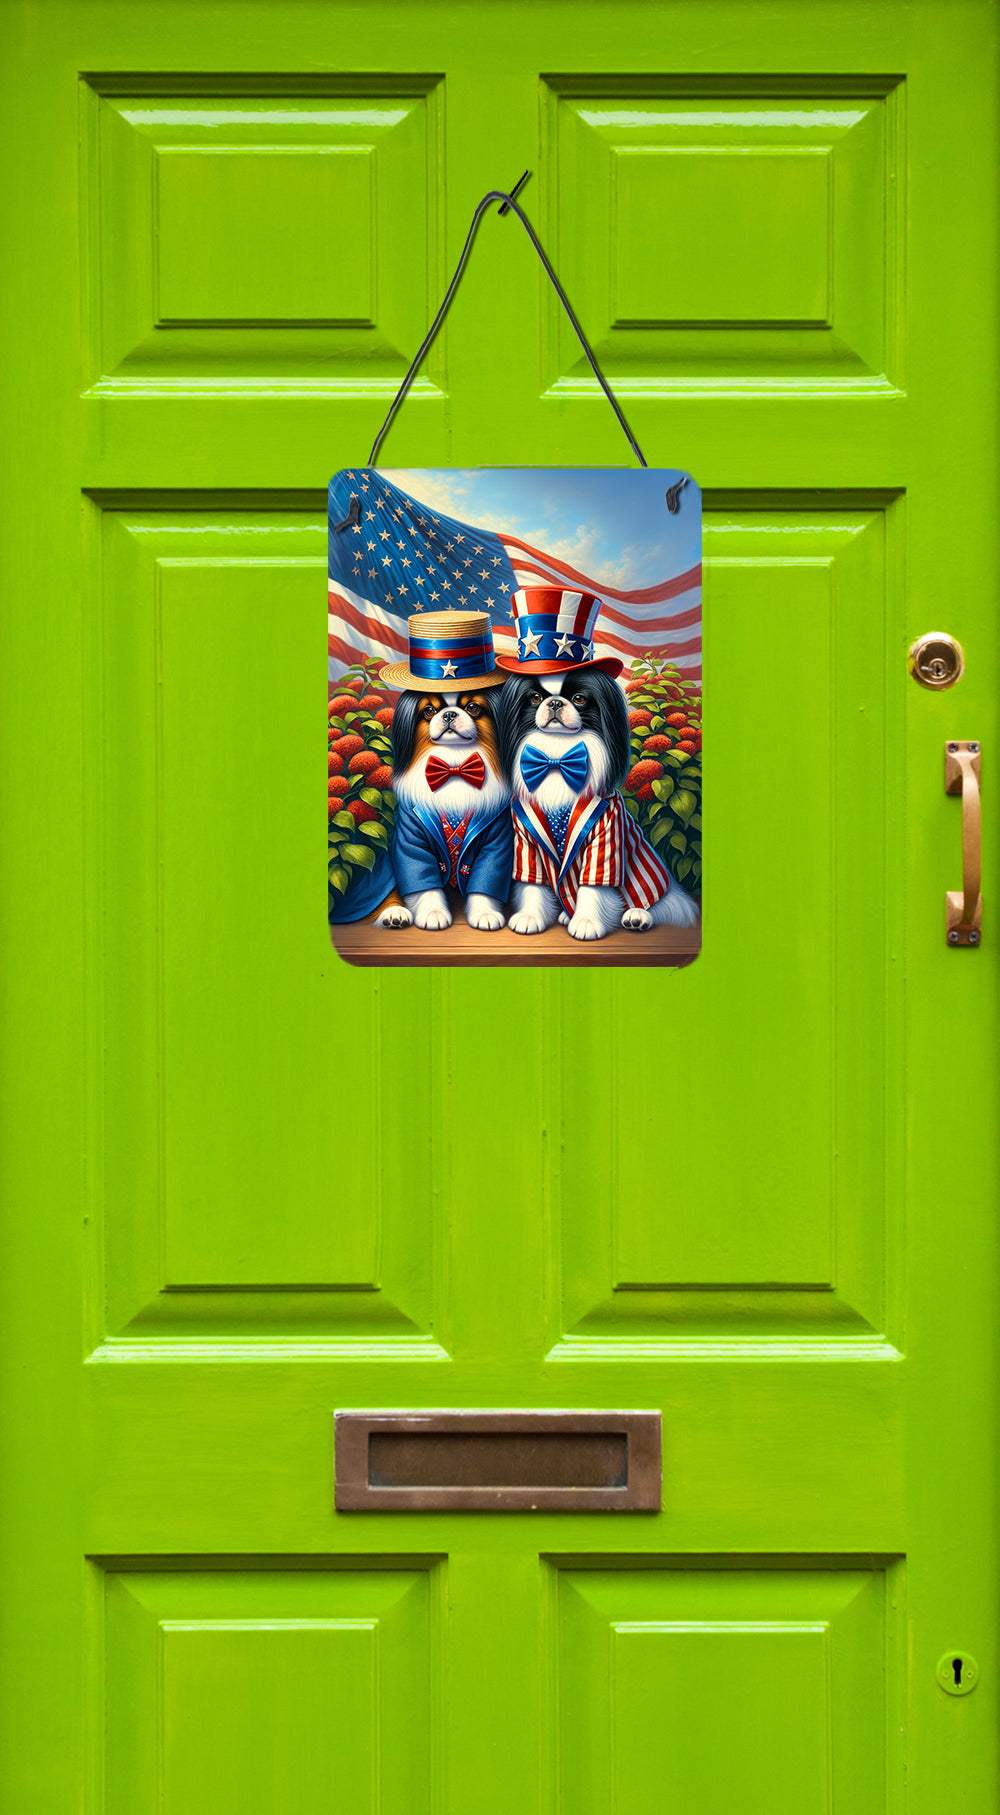 Buy this All American Japanese Chin Wall or Door Hanging Prints